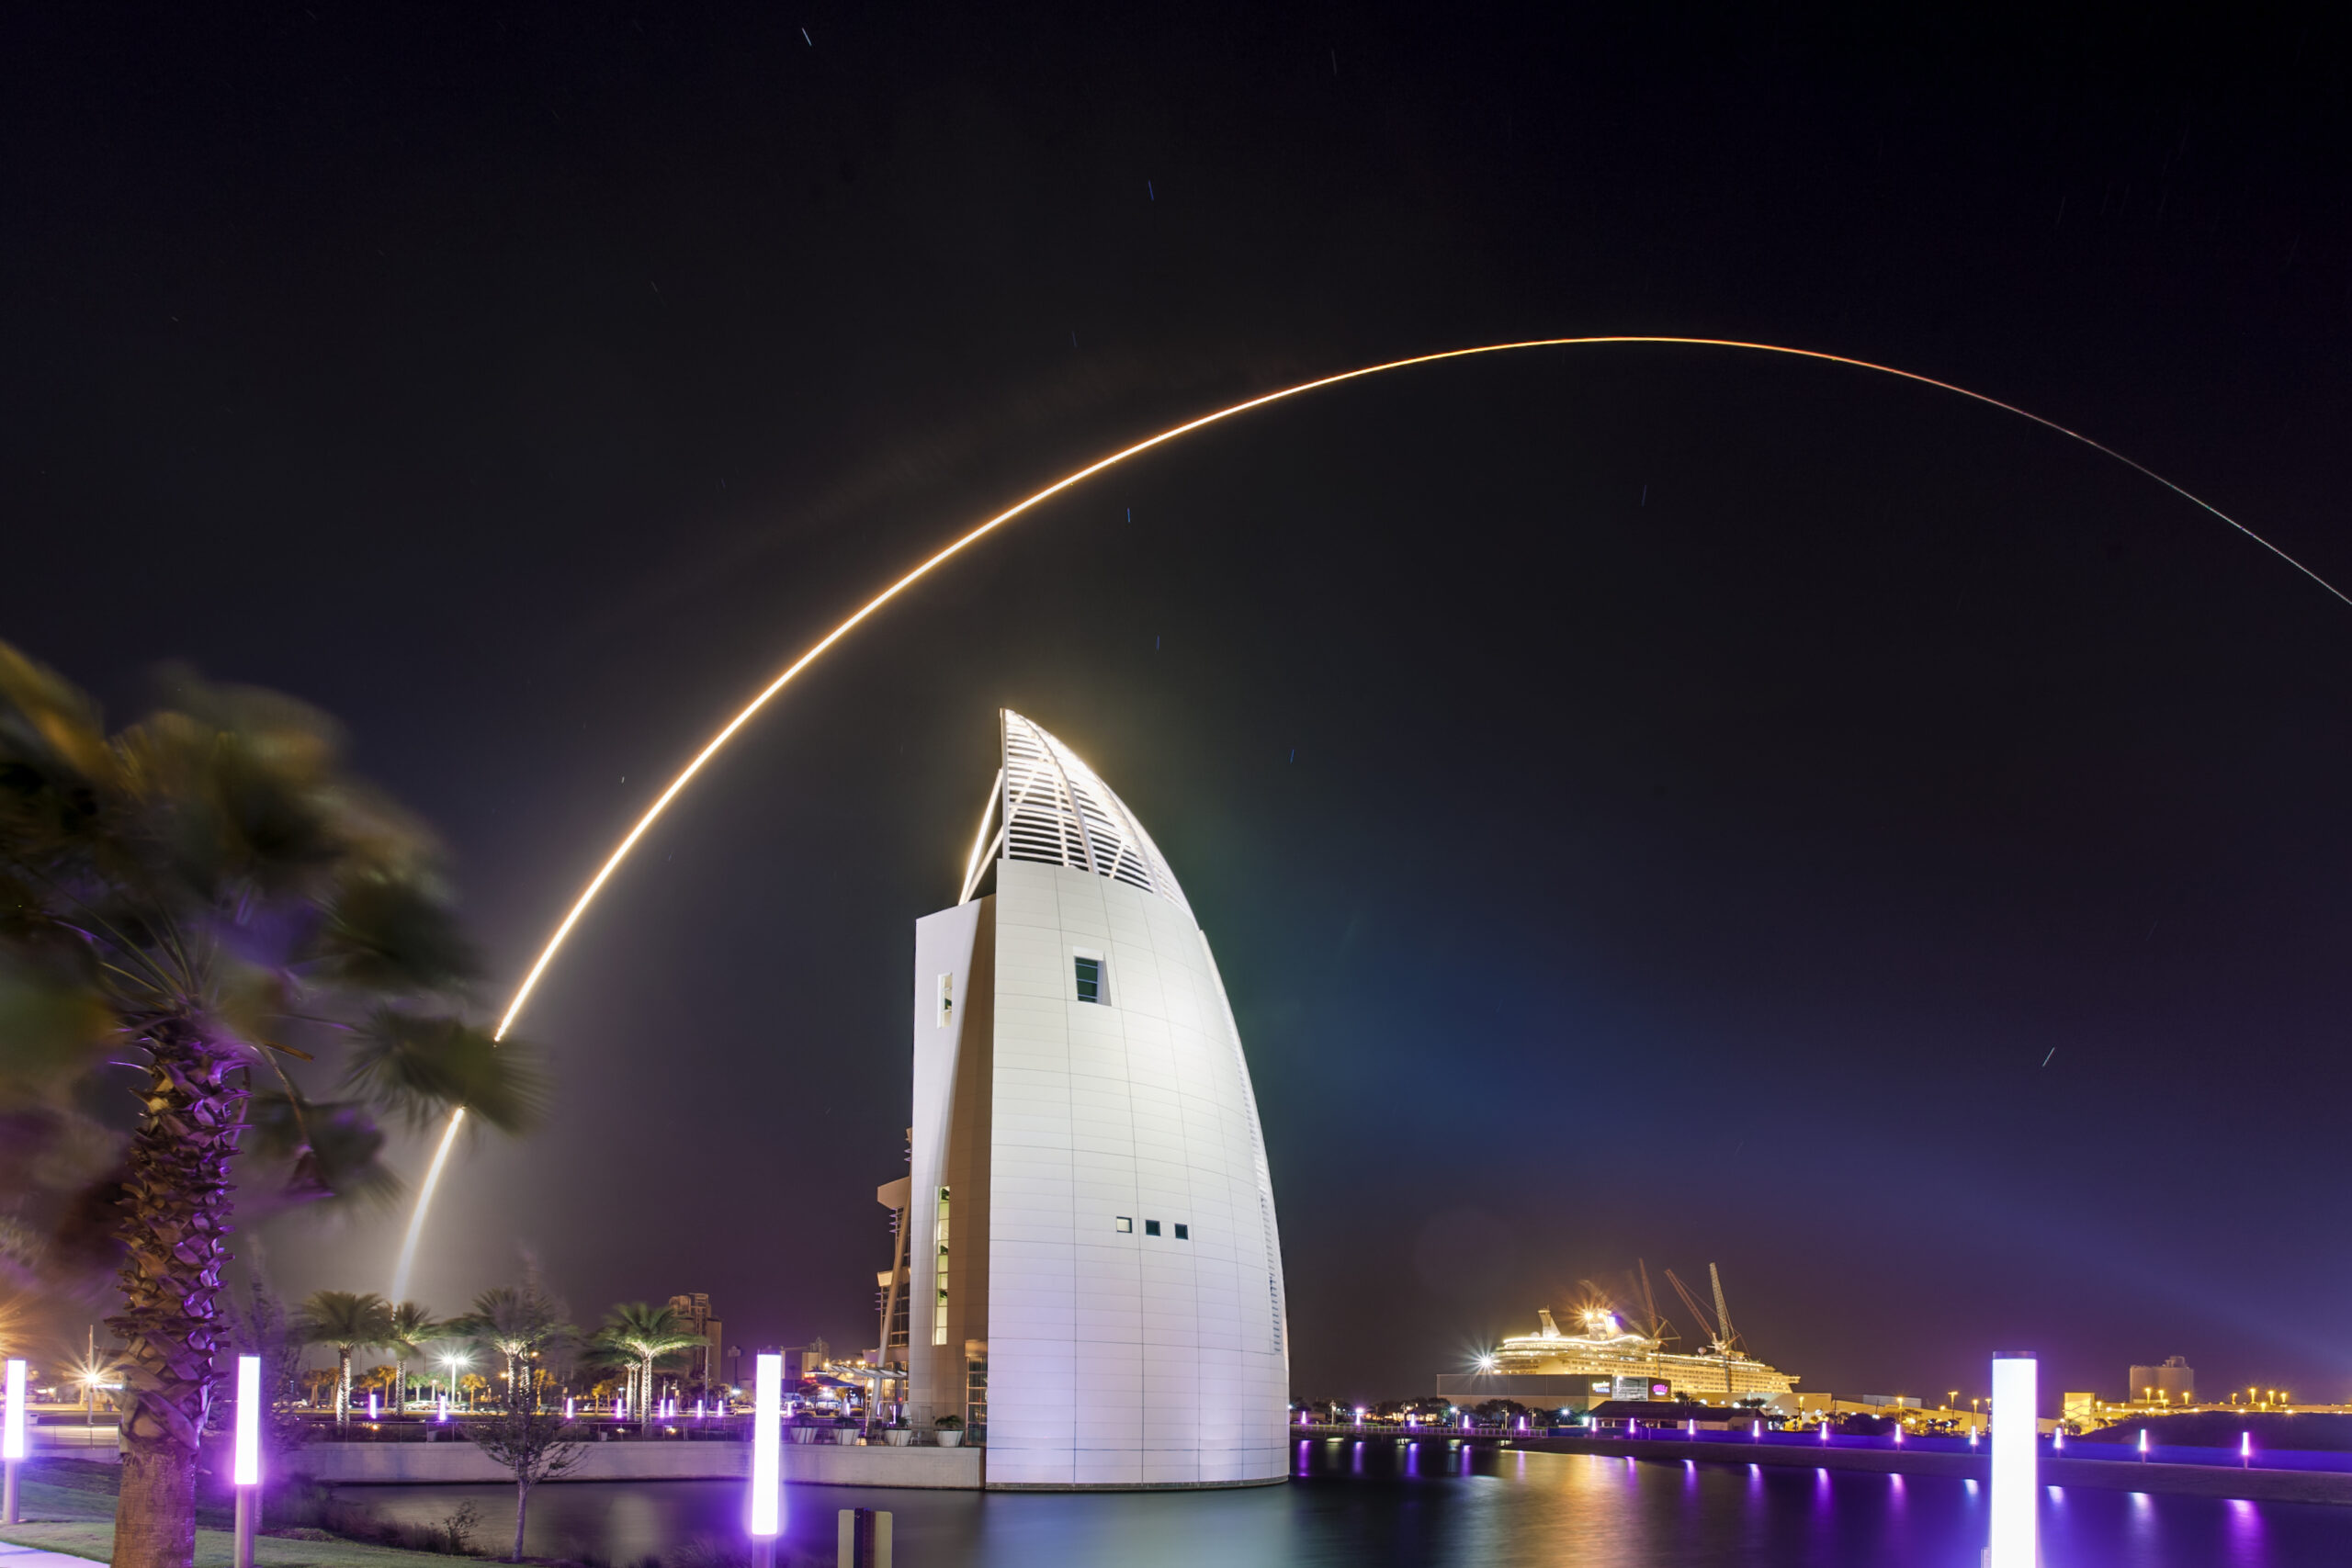 A nighttime rocket launch seen flying above the Exploration Tower in Port Canaveral